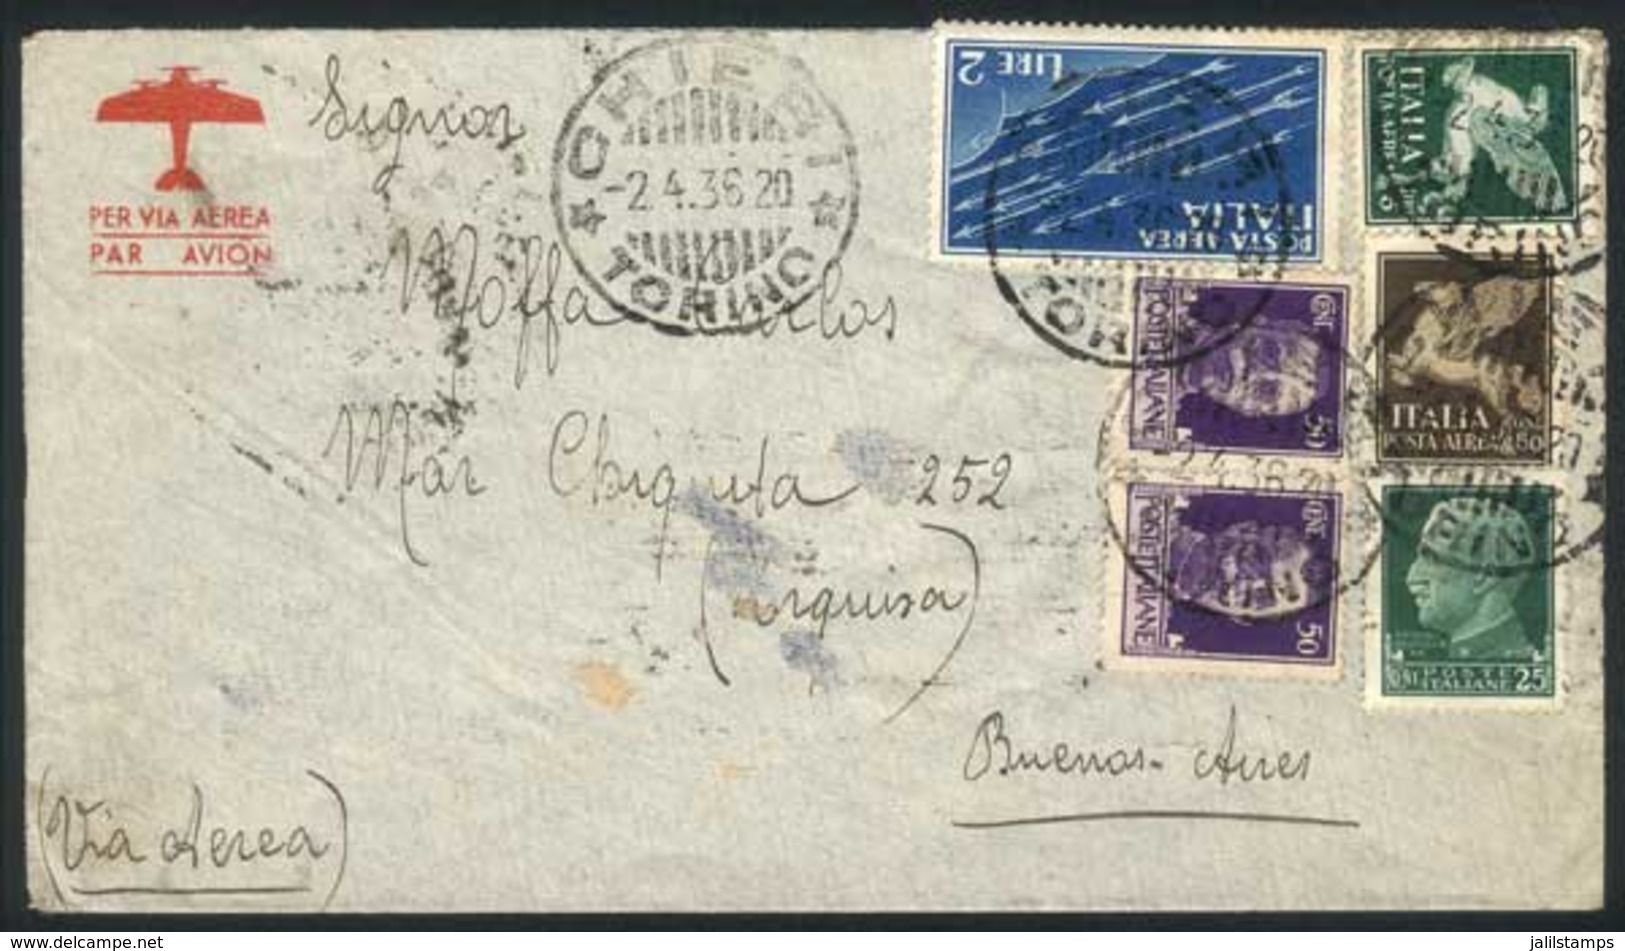 ITALY: Airmail Cover Sent From Chieri To Buenos Aires On 2/AP/1936, Franked With Interesting 8.75 Lire Postage, Very Col - Unclassified